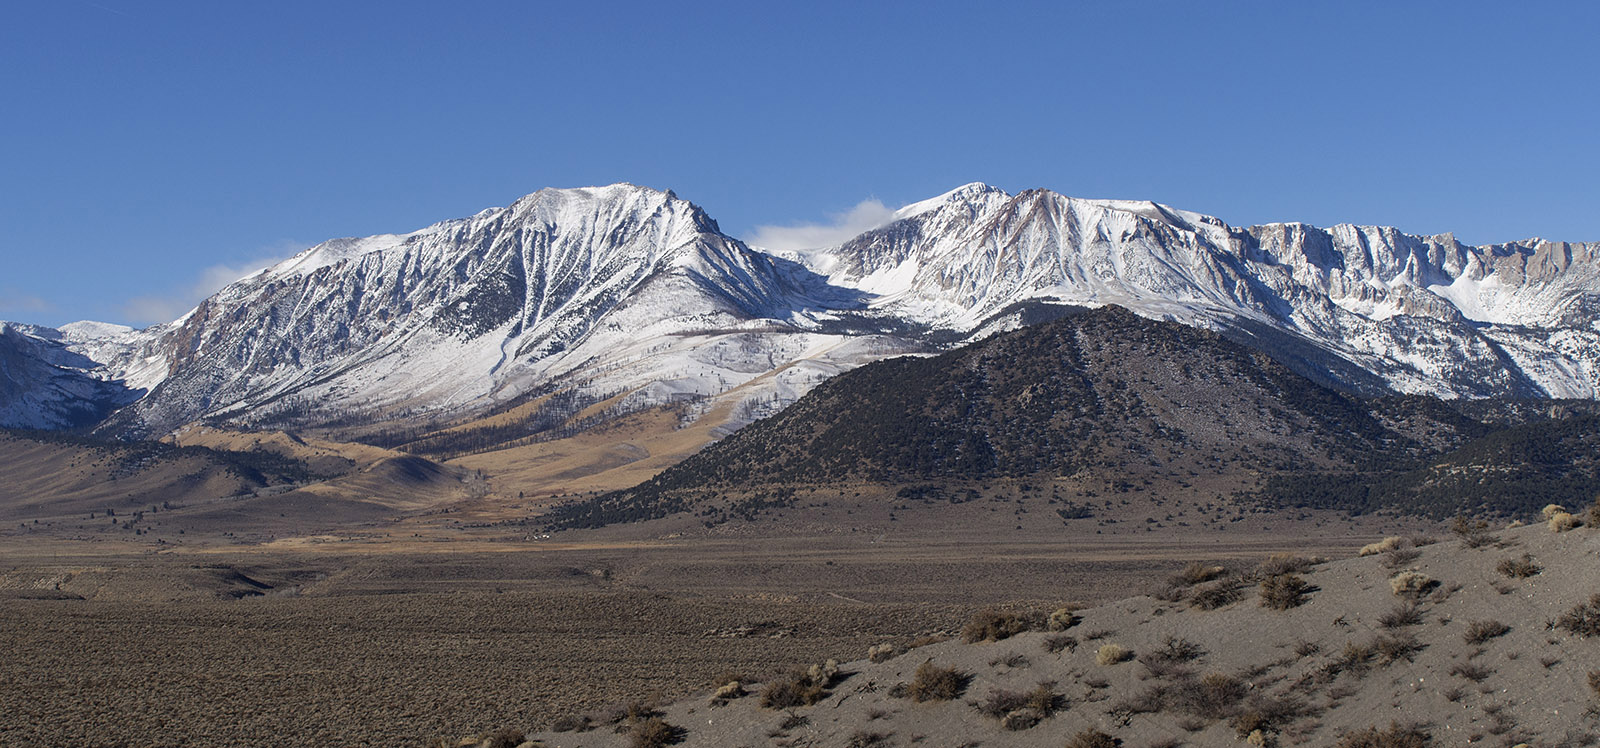 Carson Peak in the June Lake area as viewed from Panum Crater.